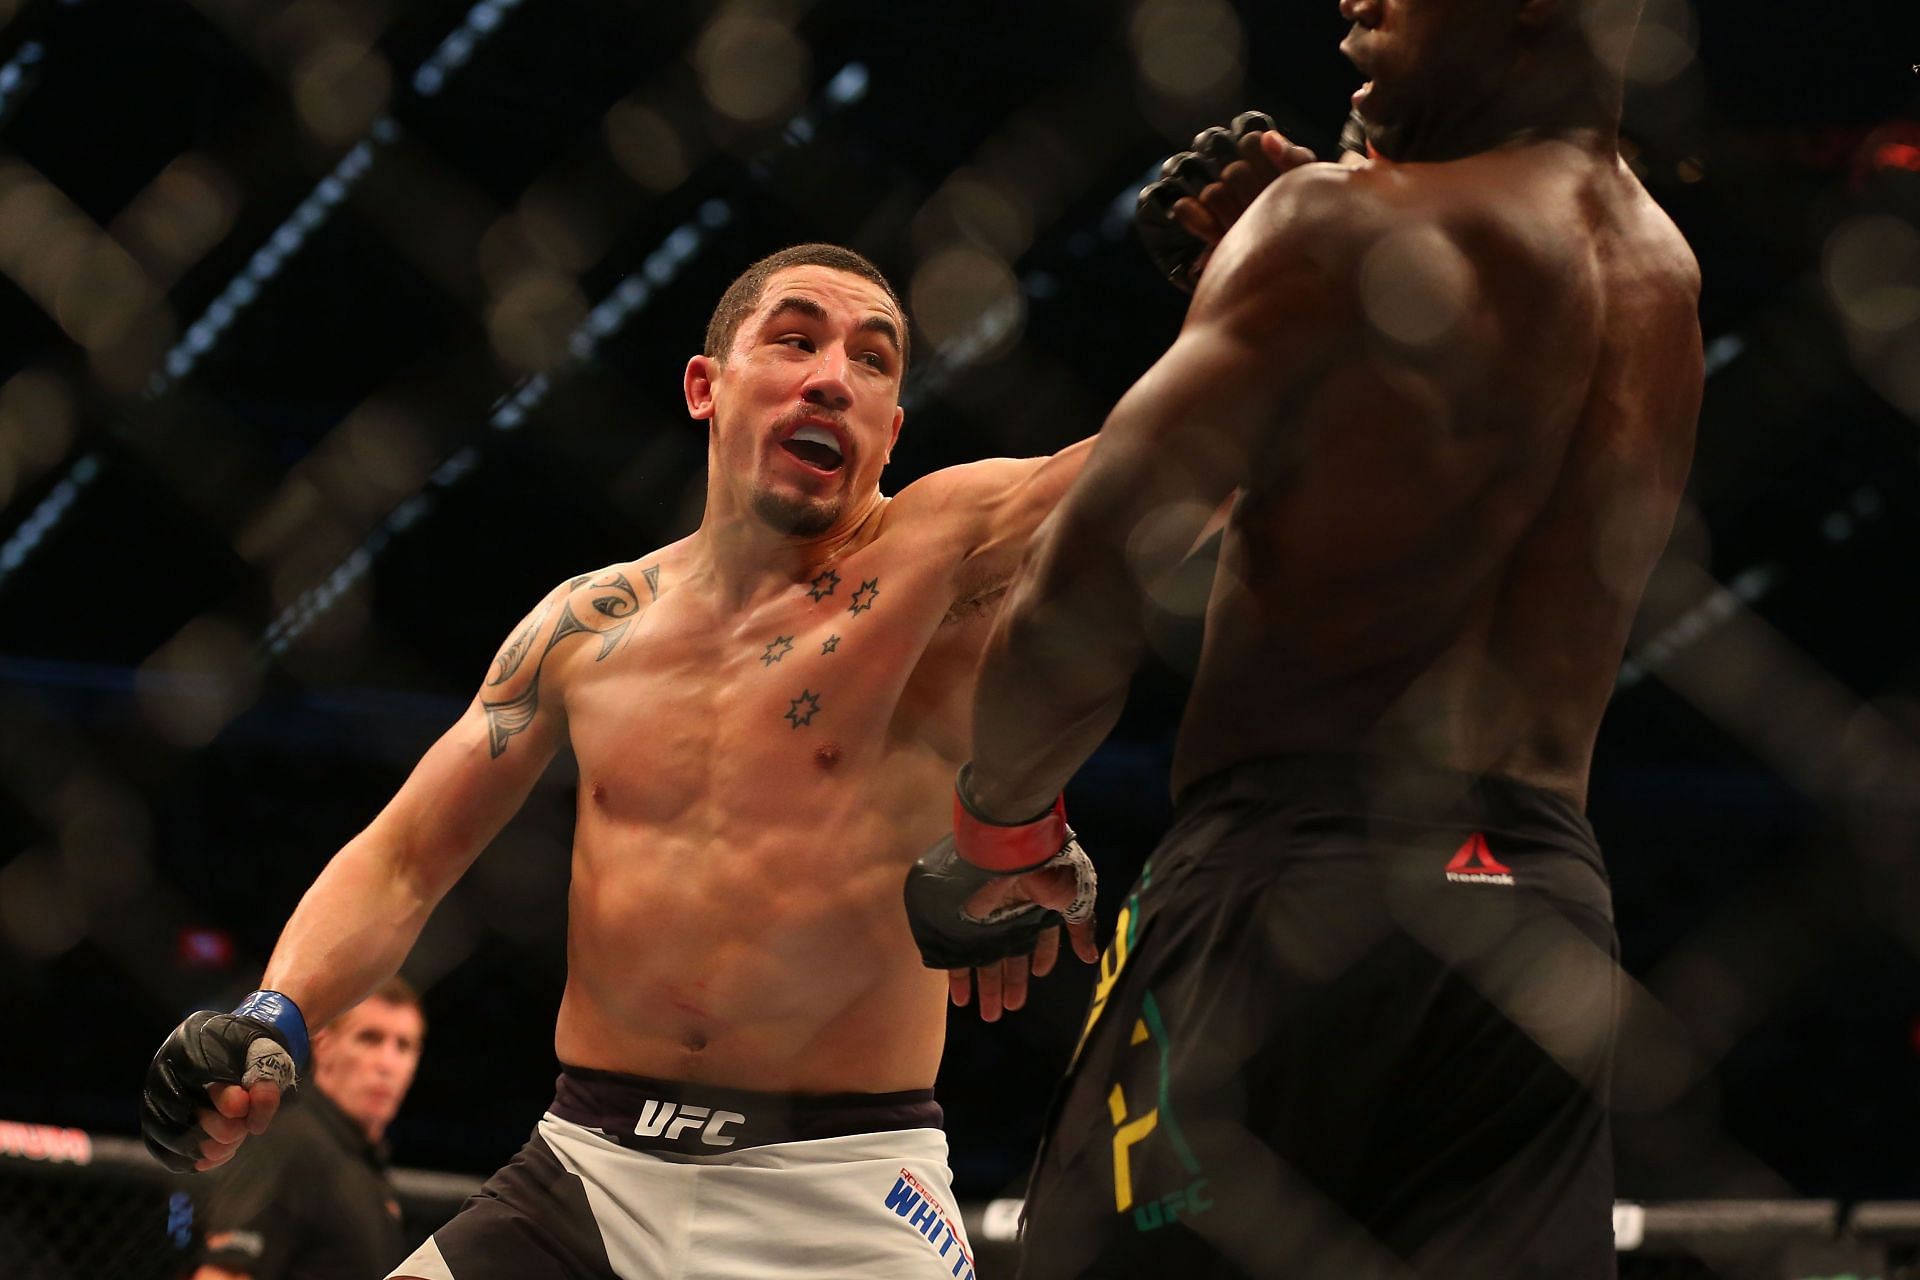 Robert Whittaker holds a record of 23-5